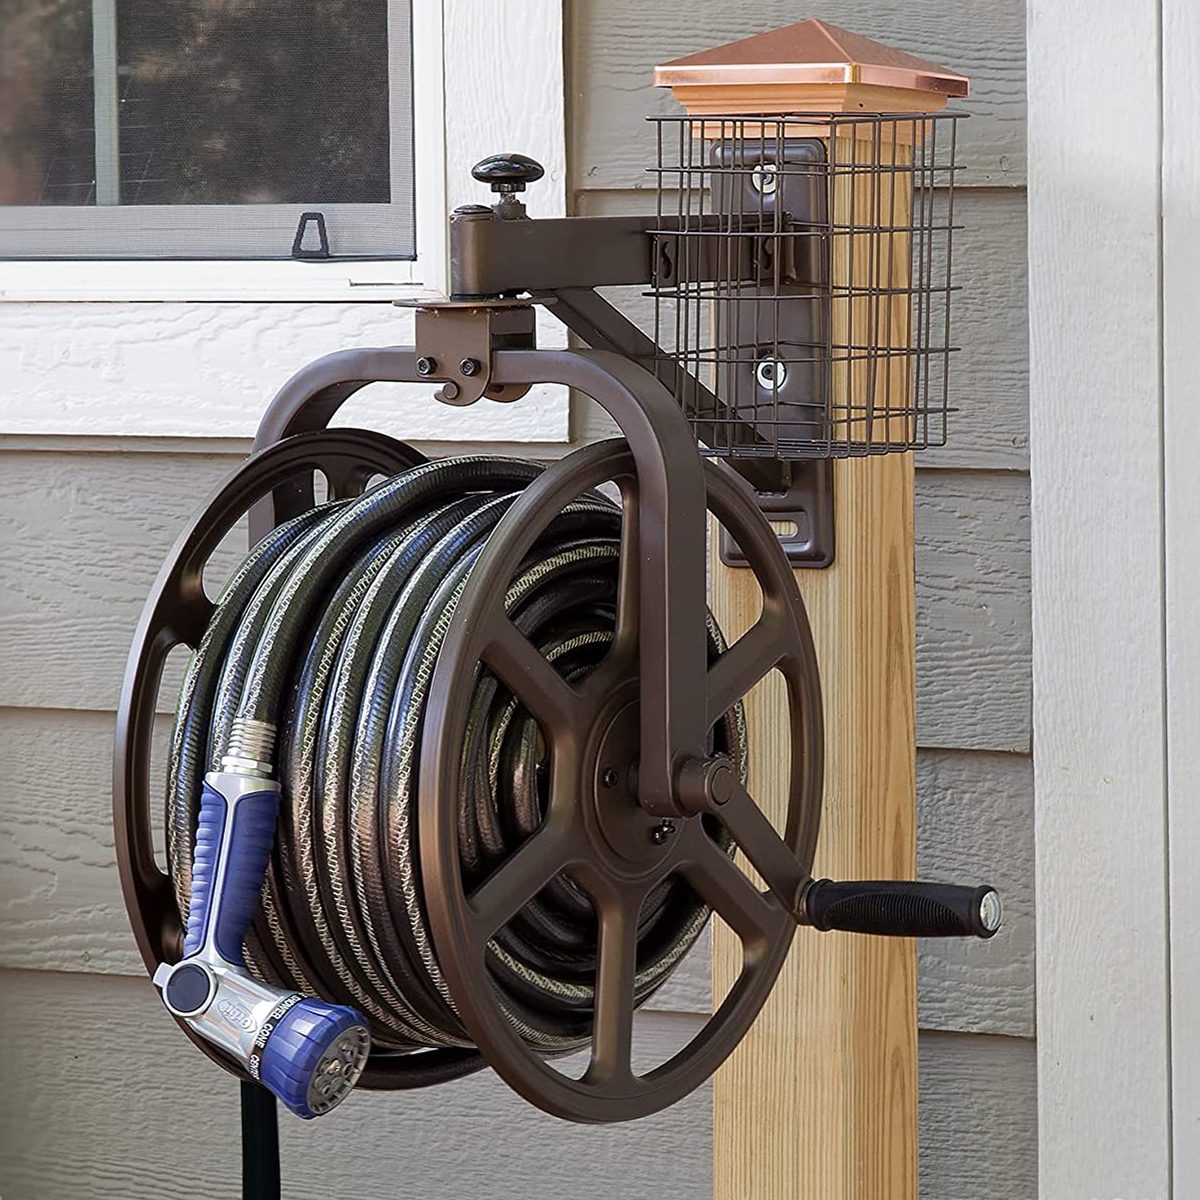 Best garden hose reels and holders for stylish storage - Gardens